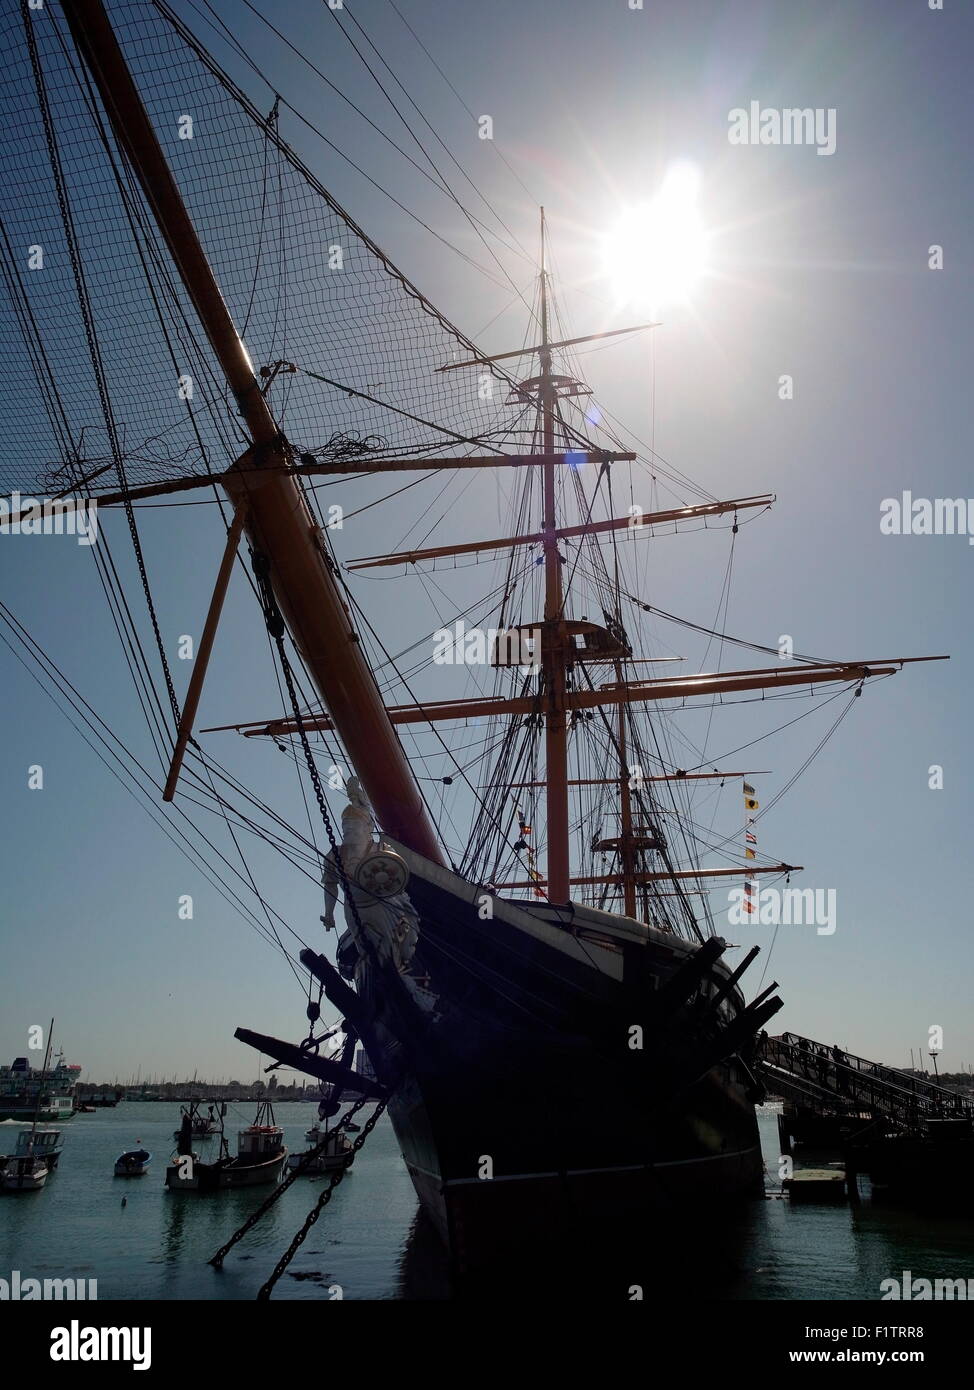 AJAXNETPHOTO. 4TH JUNE, 2015.PORTSMOUTH, ENGLAND. - WARRIOR GETS HERITAGE LOTTERY FUNDING - THE 1860 SHIP NEEDS MAJOR REPAIRS TO BULWARKS AND WATER BAR. PHOTO:JONATHAN EASTLAND/AJAX REF:GXR150406 1074892 Stock Photo